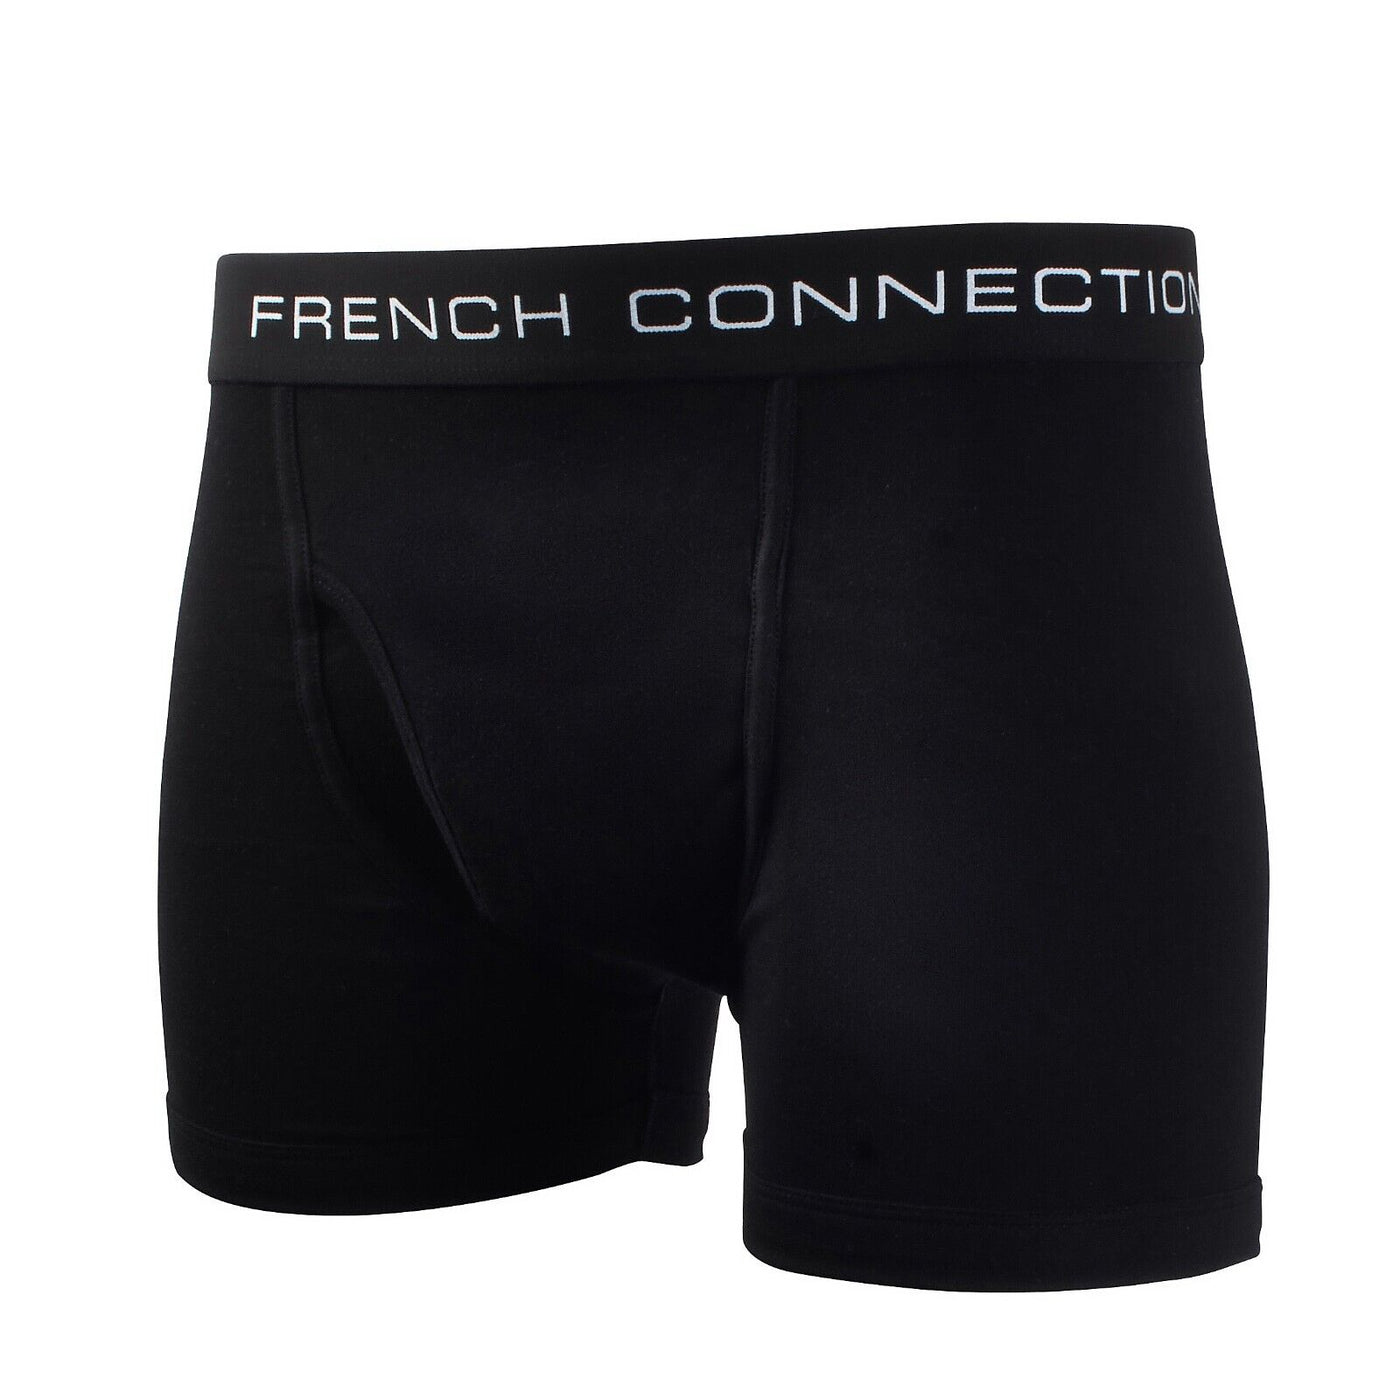 French Connection Men's White & Black 2 Pack Boxer Briefs